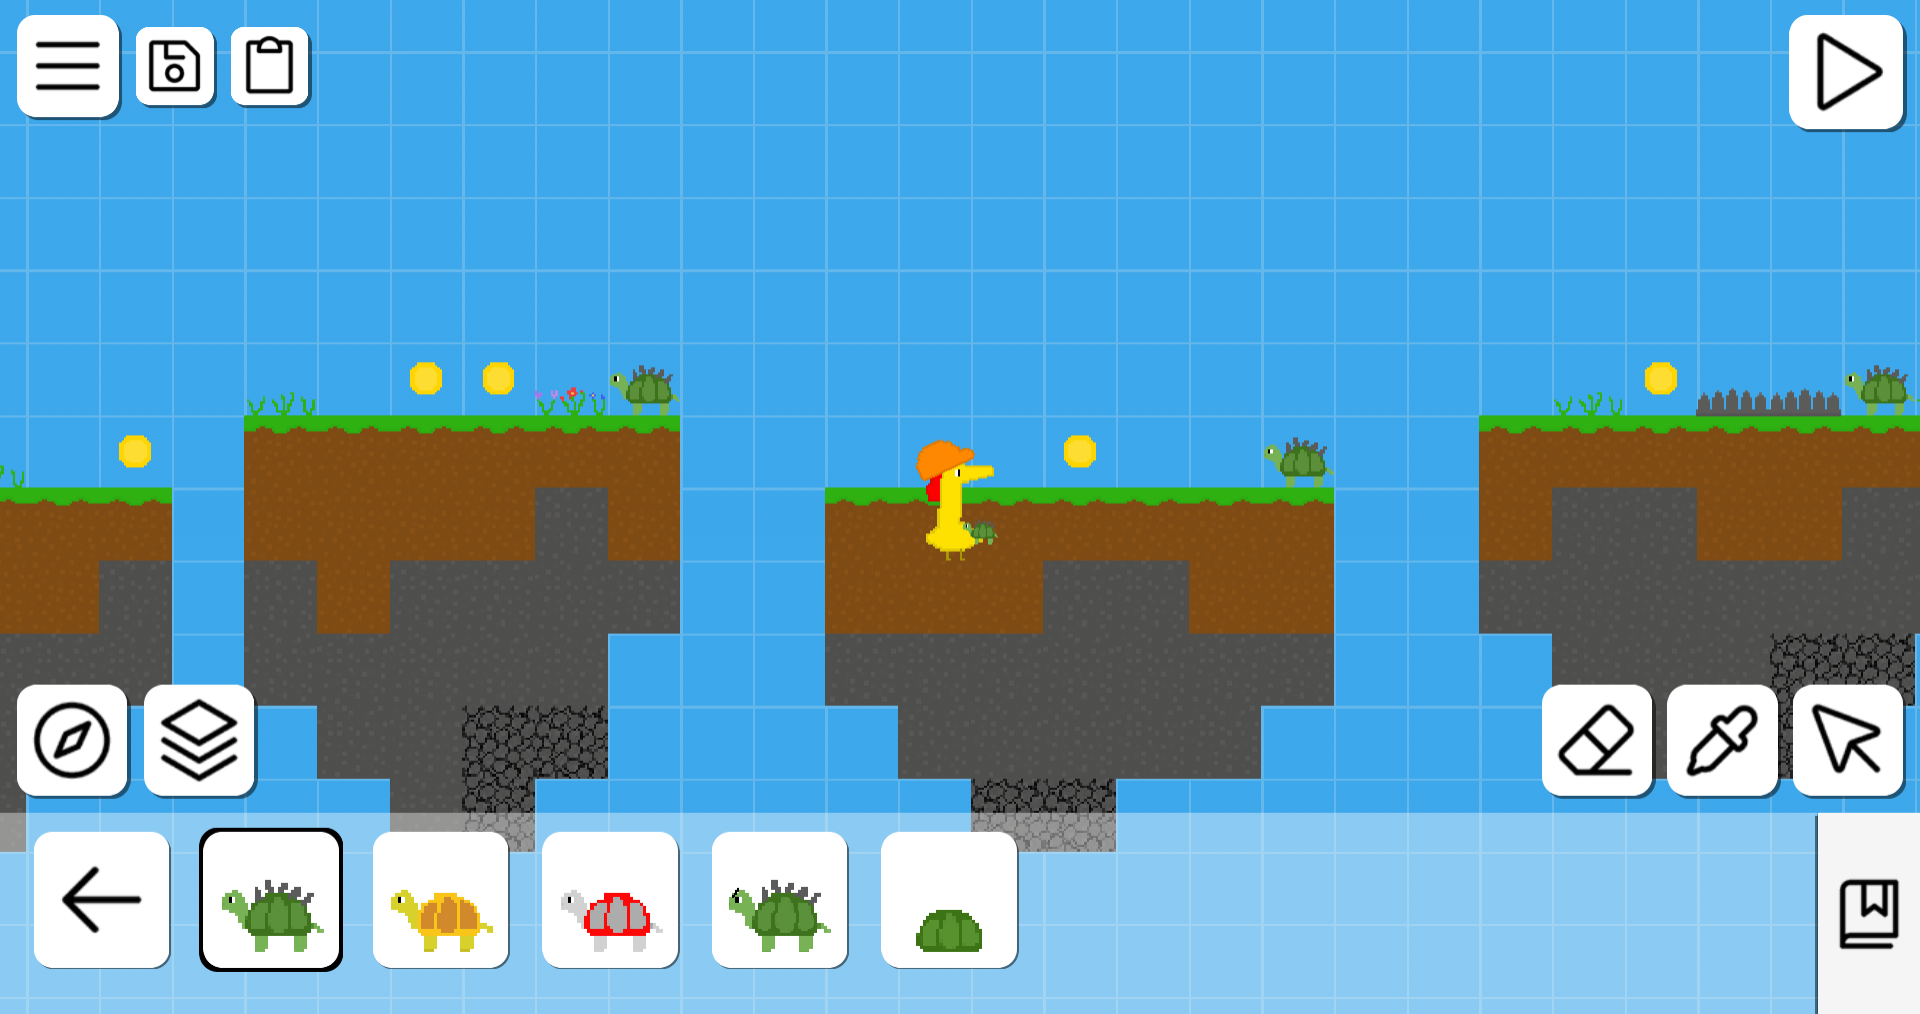 Editing level with turtles on floating islands.